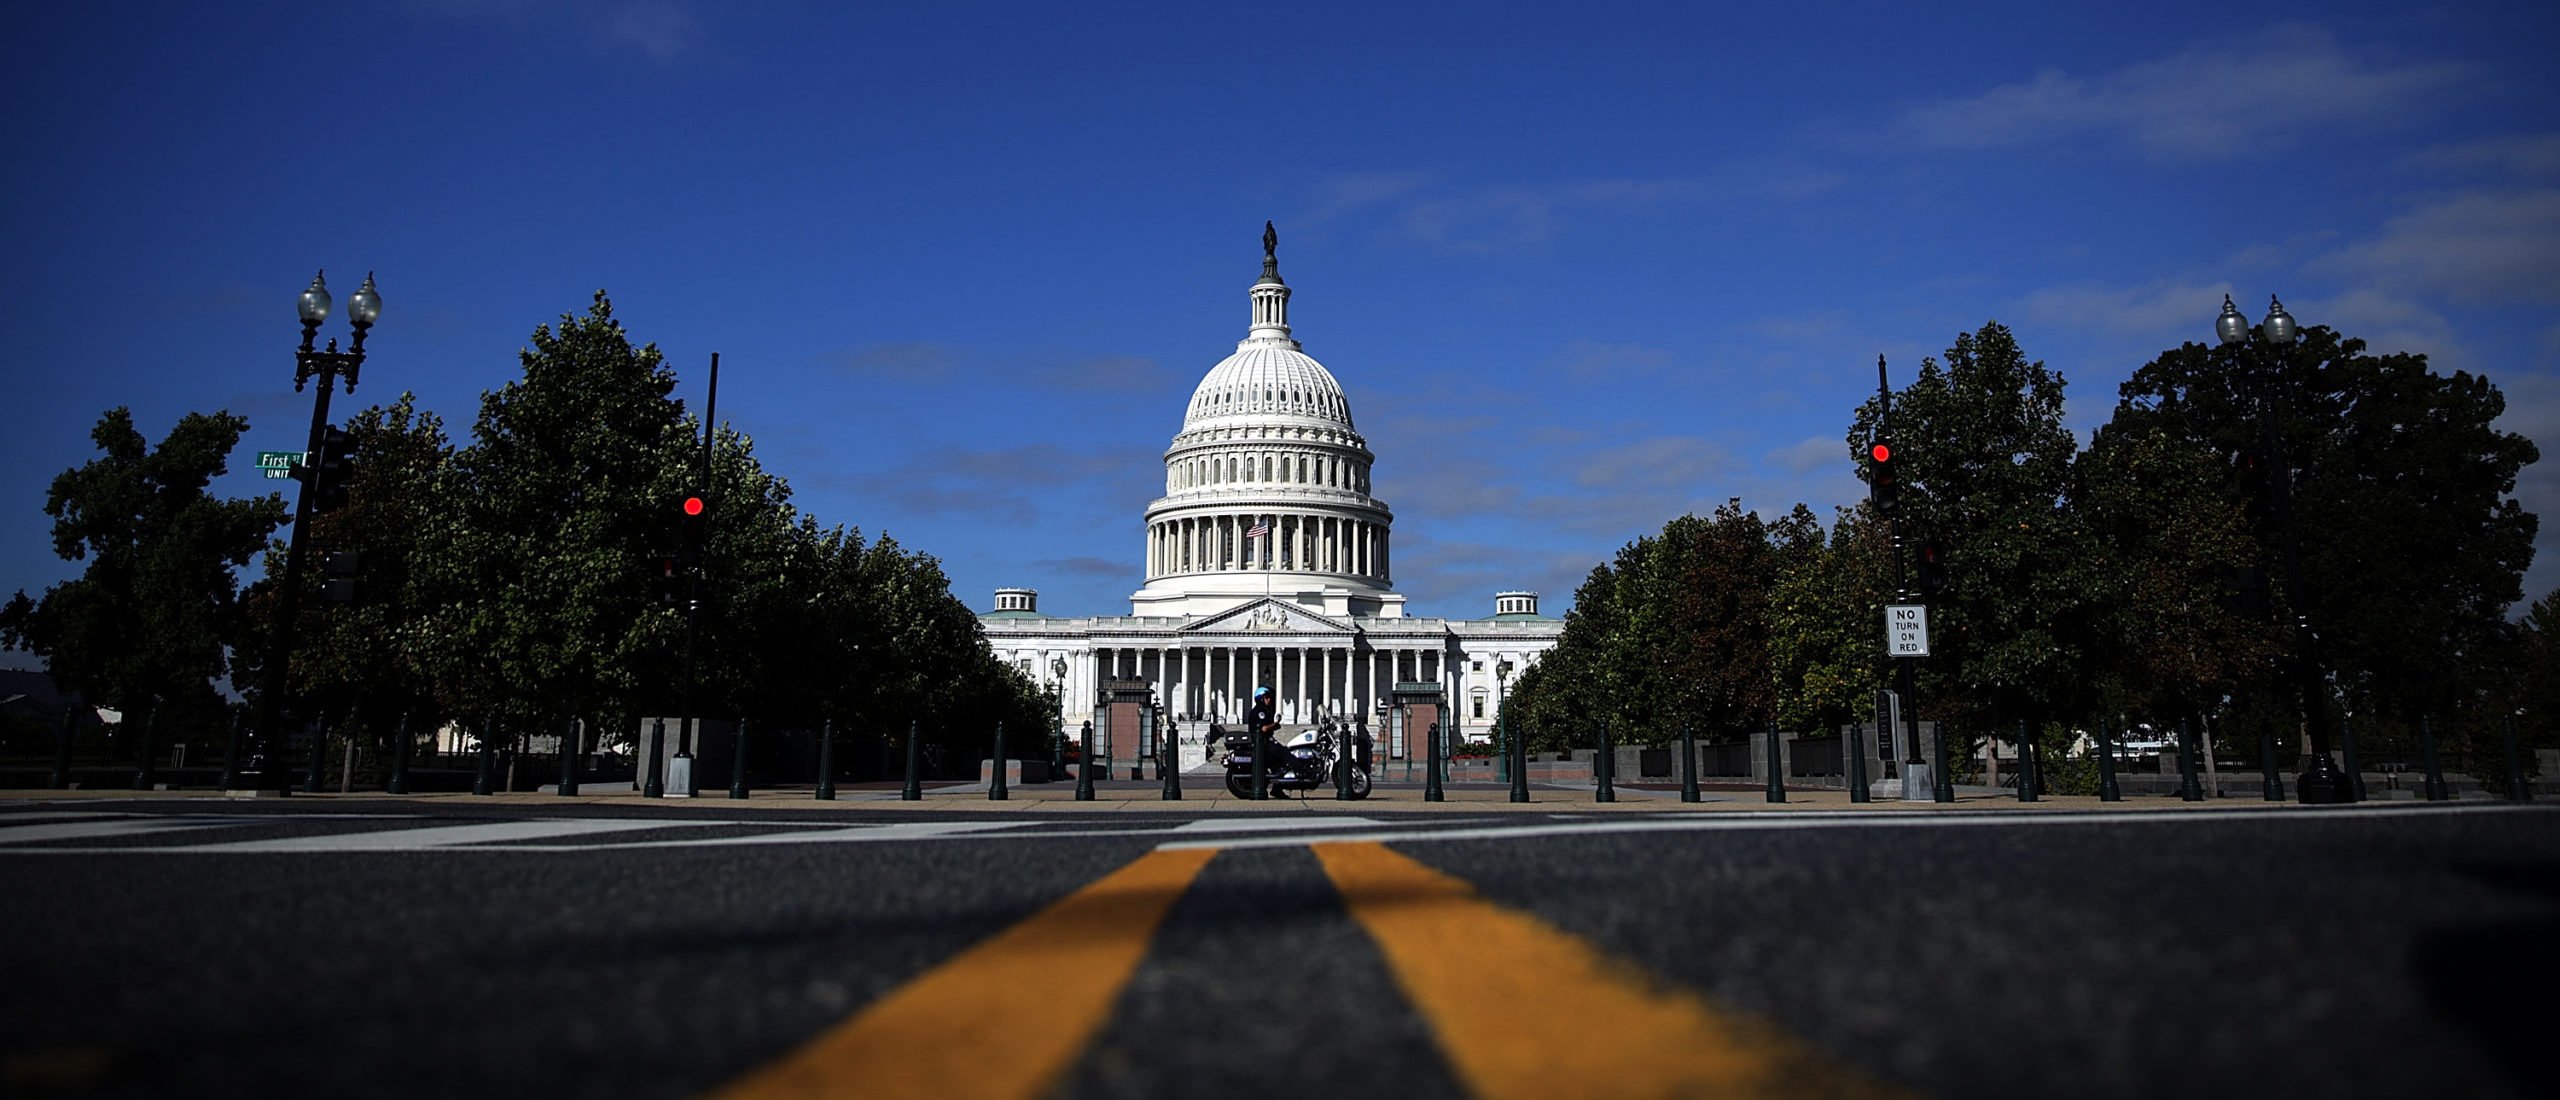 WASHINGTON, DC - SEPTEMBER 29: The United States Capitol building is seen as Congress remains gridlocked over legislation to continue funding the federal government September 29, 2013 in Washington, DC. The House of Representatives passed a continuing resolution with language to defund U.S. President Barack Obama's national health care plan yesterday, but Senate Majority Leader Harry Reid has indicated the U.S. Senate will not consider the legislation as passed by the House. (Photo by Win McNamee/Getty Images)